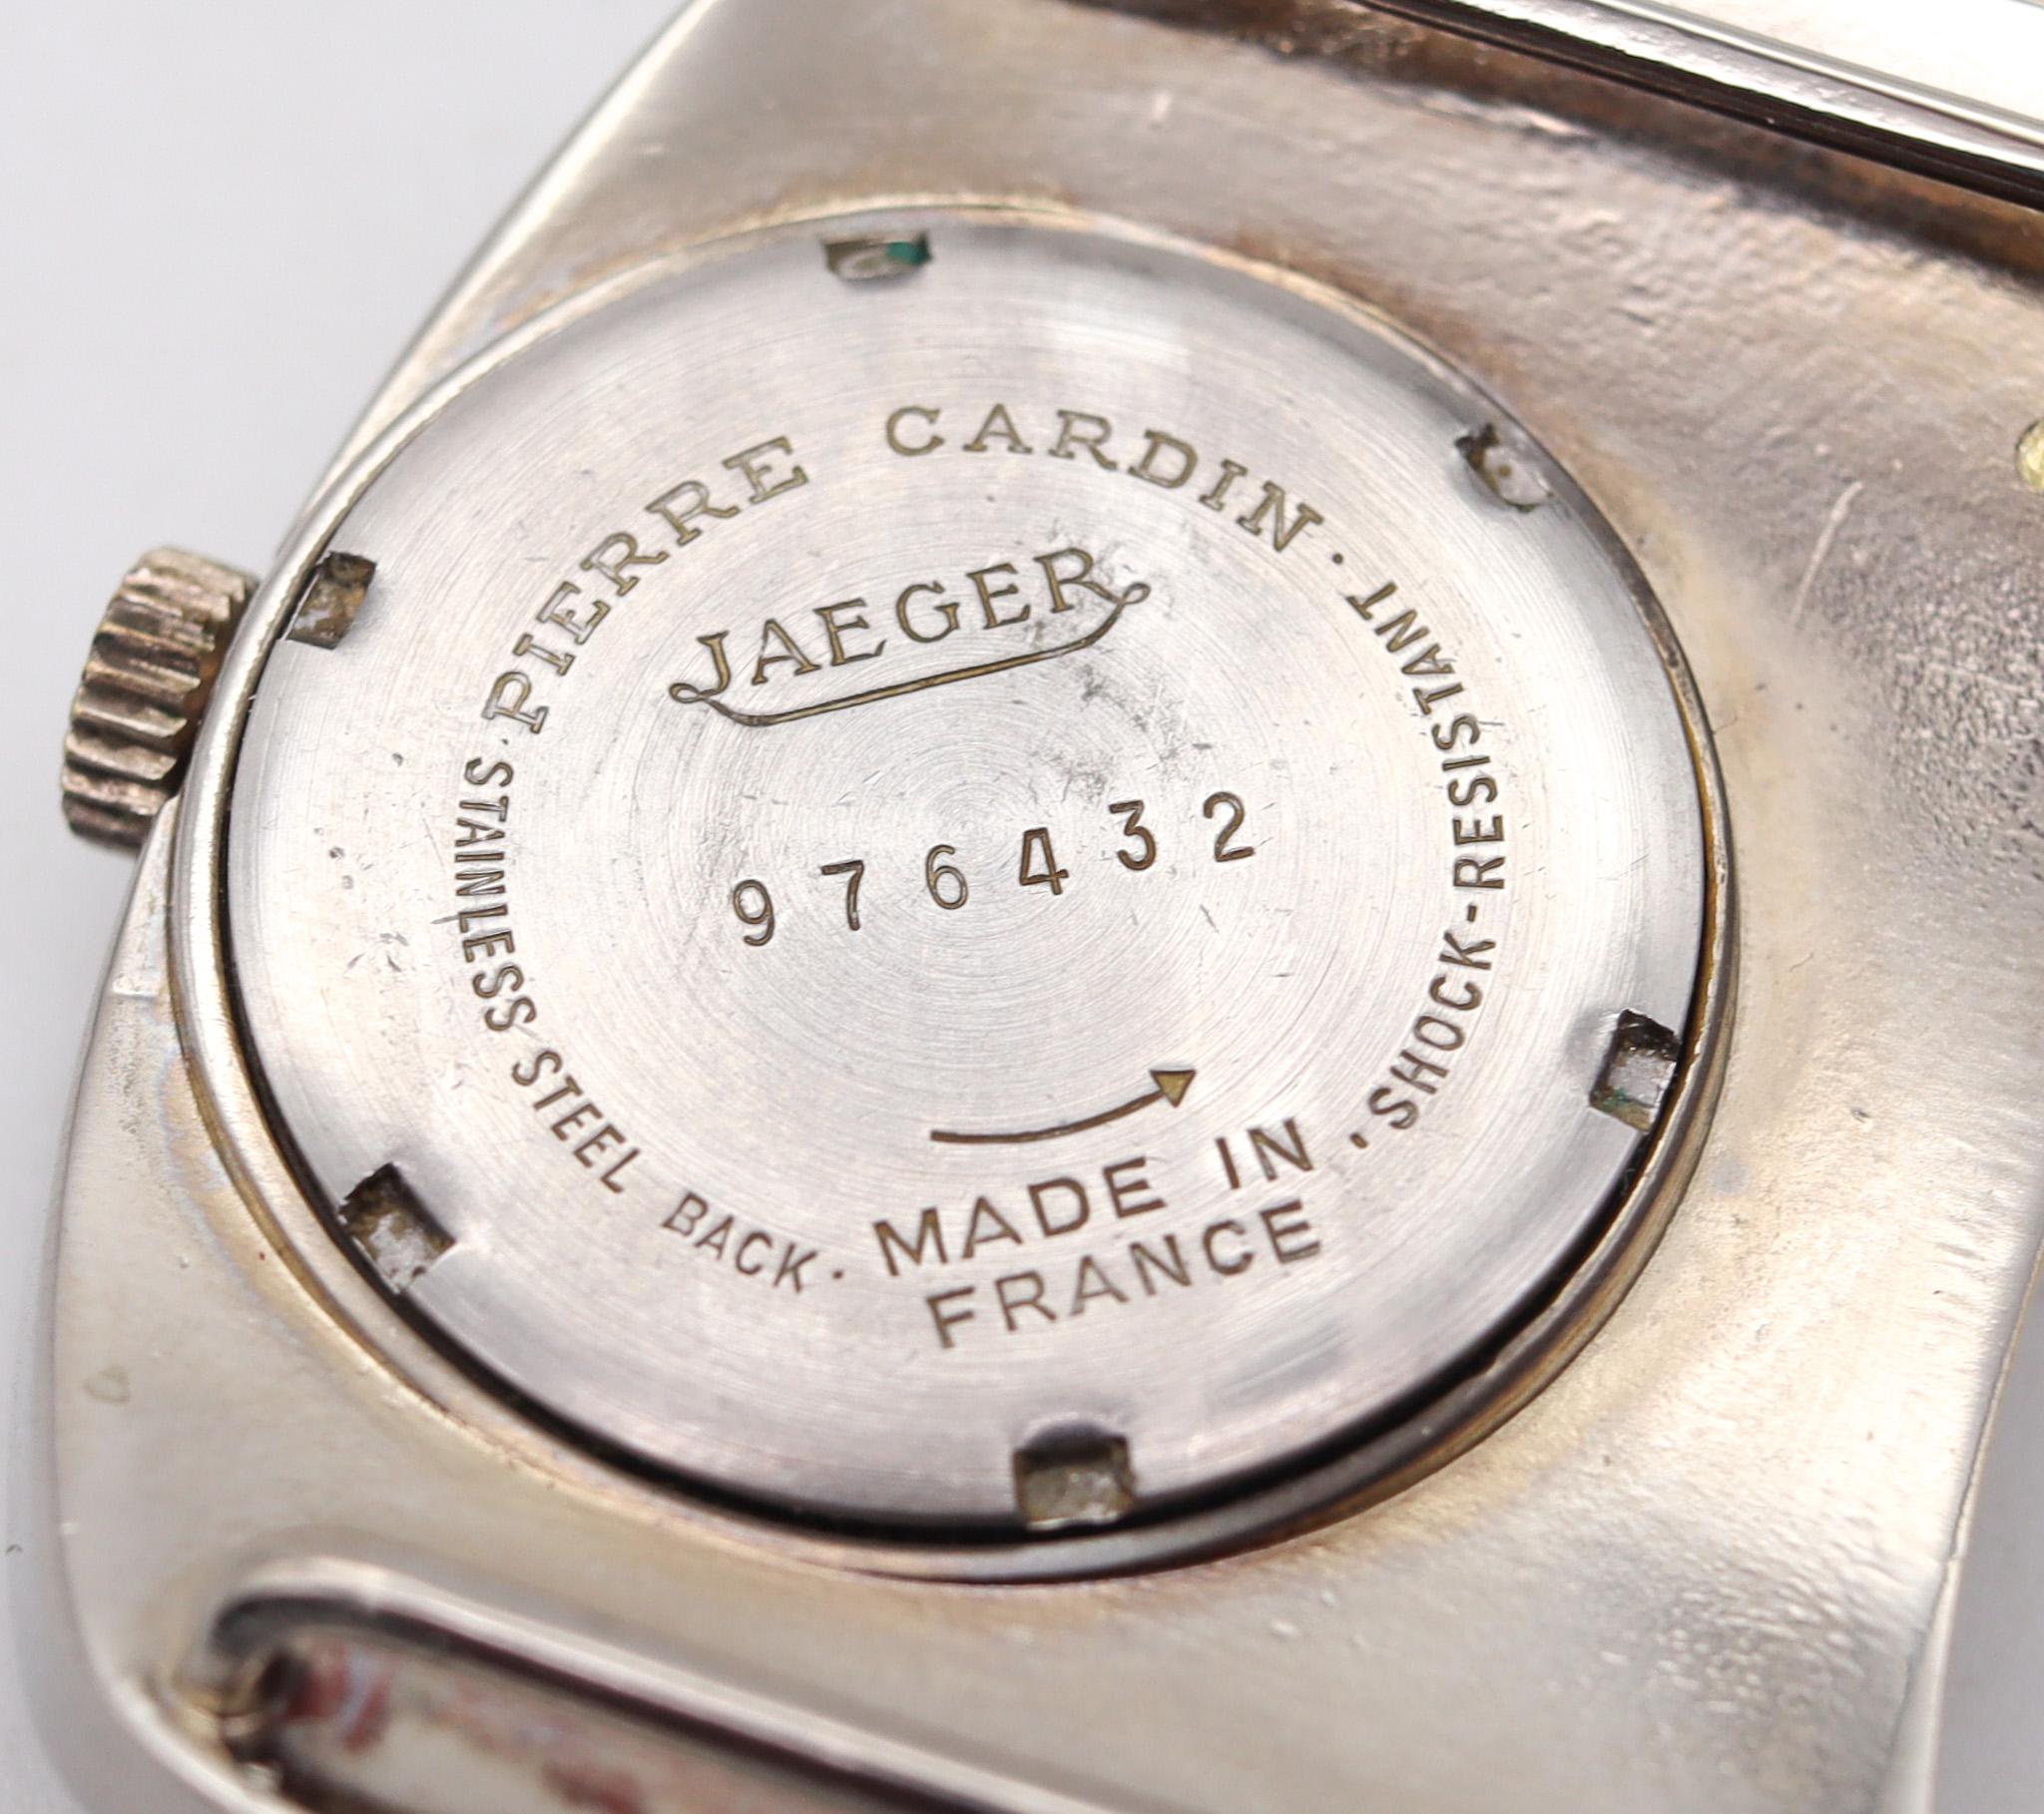 Mixed Cut Pierre Cardin 1971 by Jaeger Lecoultre Pc-117 Retro Wrist Watch in Stainless For Sale